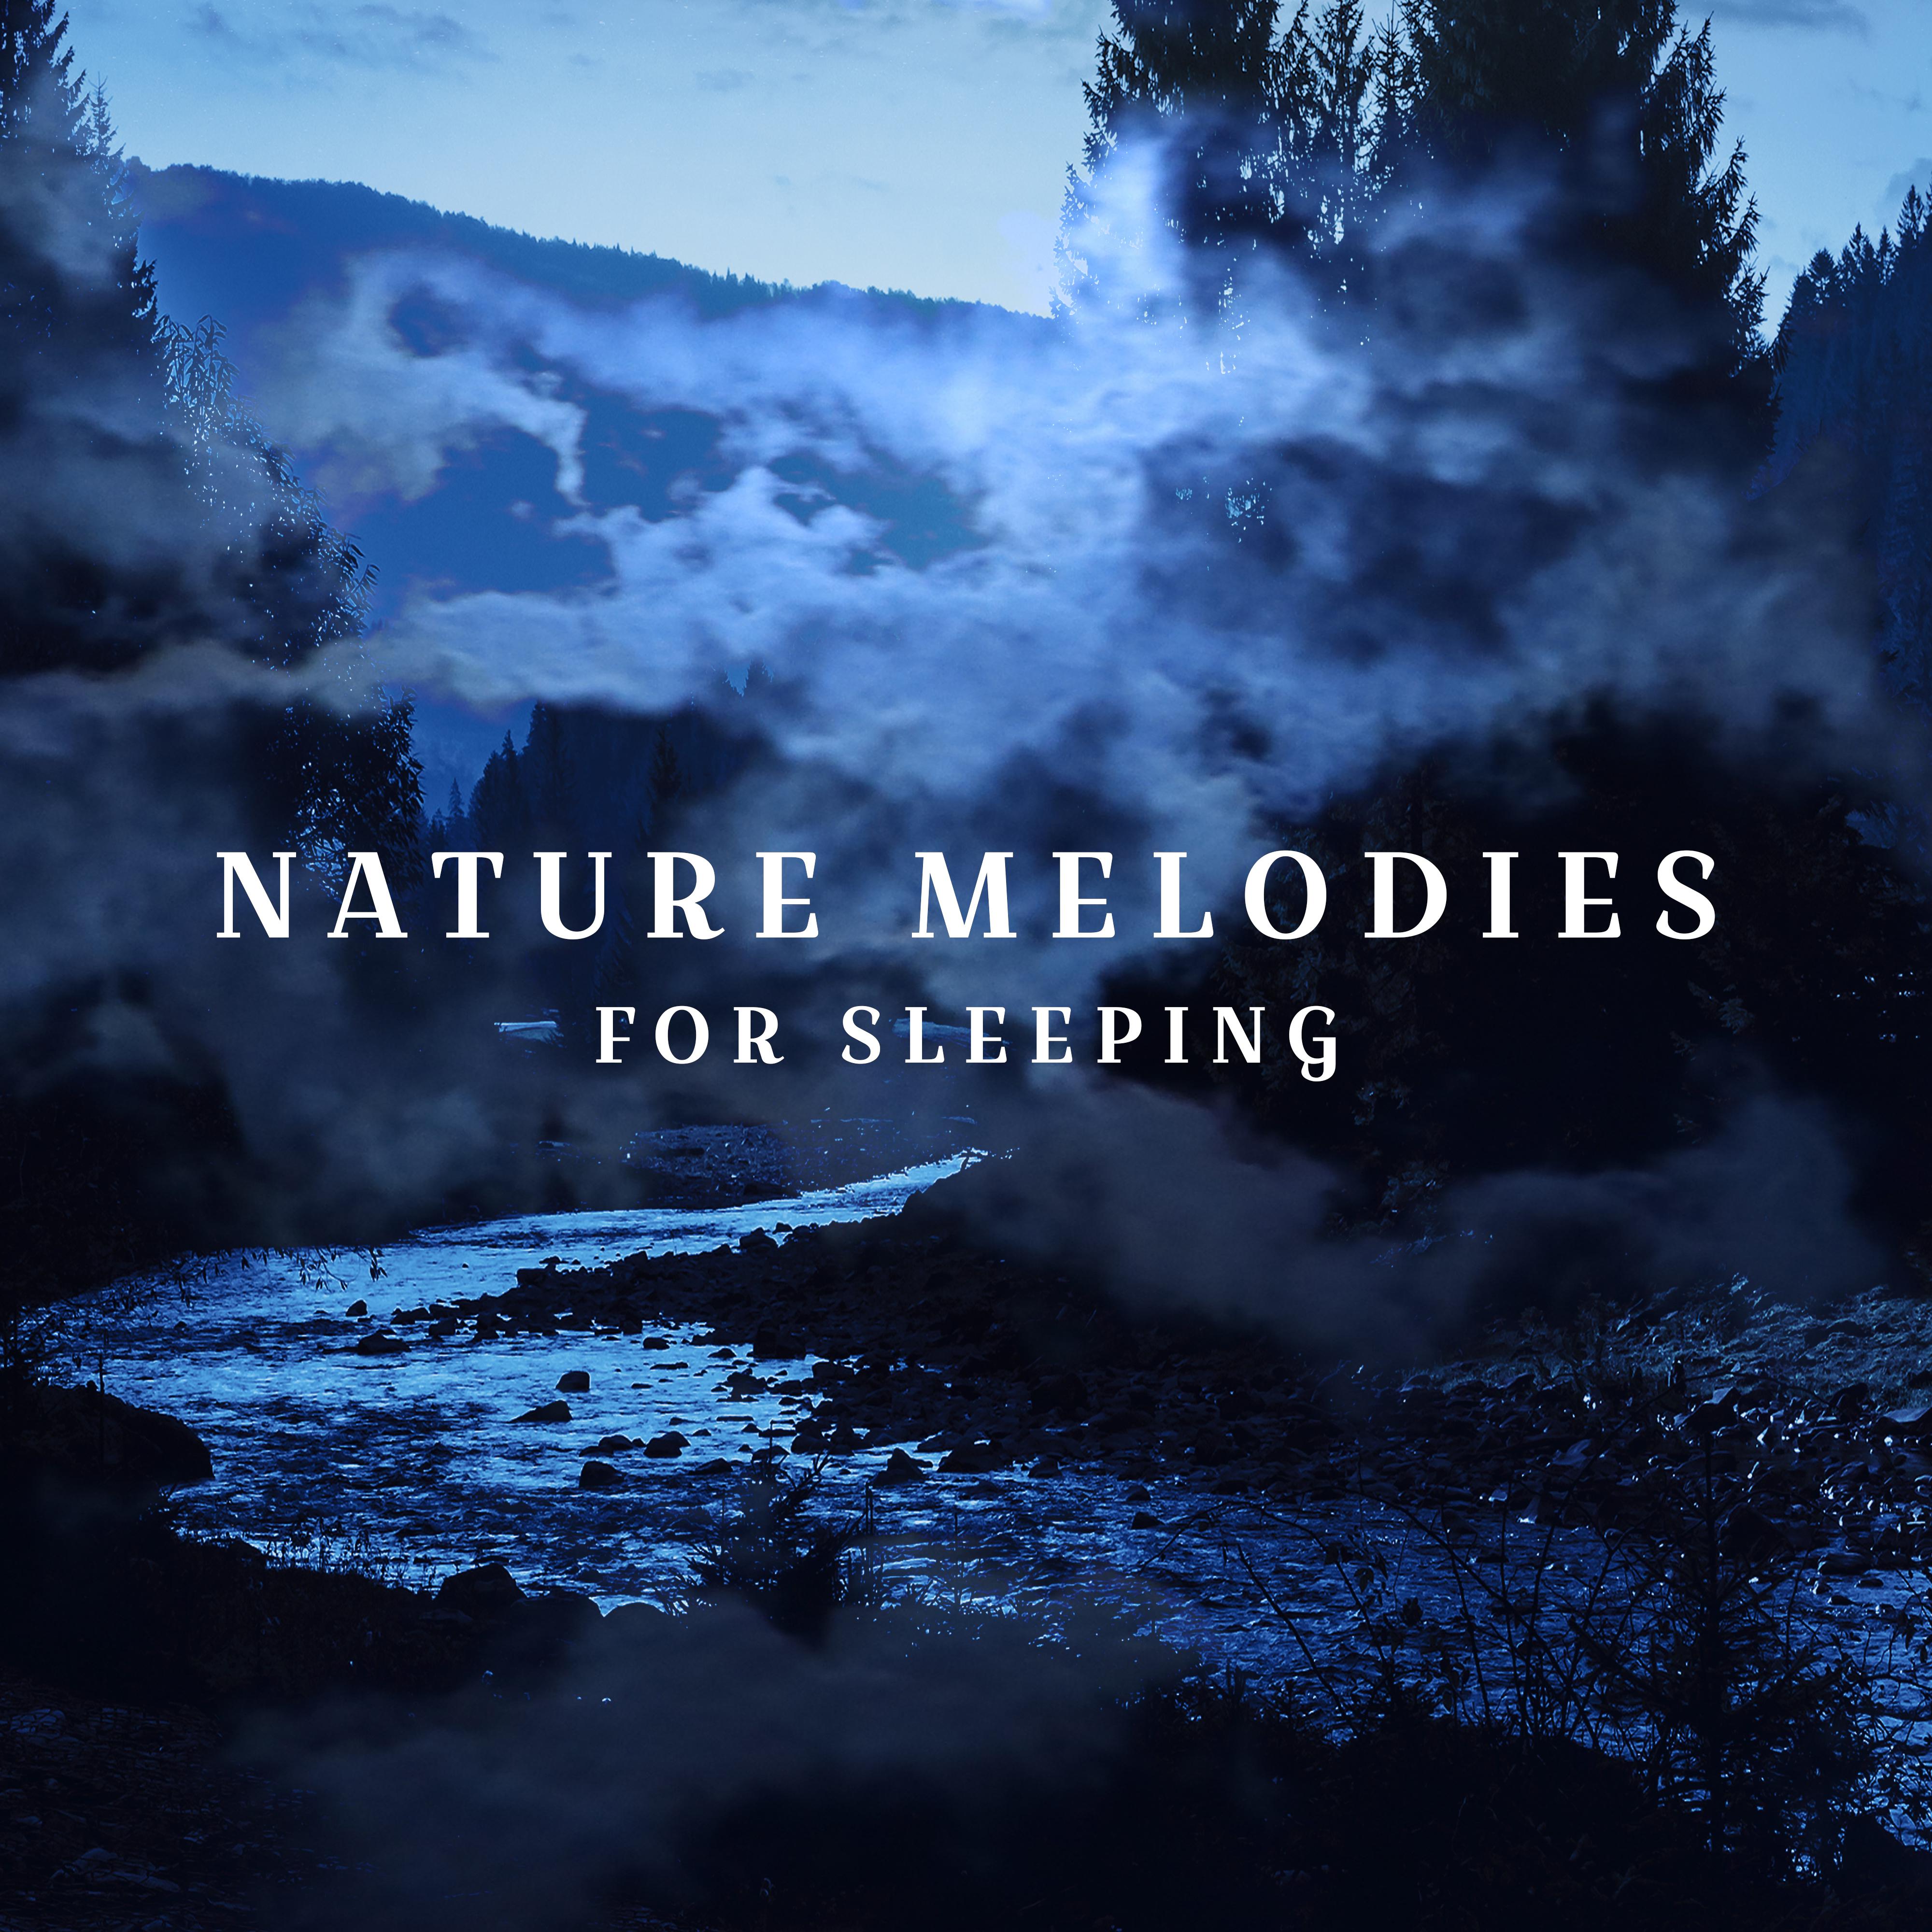 Nature Melodies for Sleeping